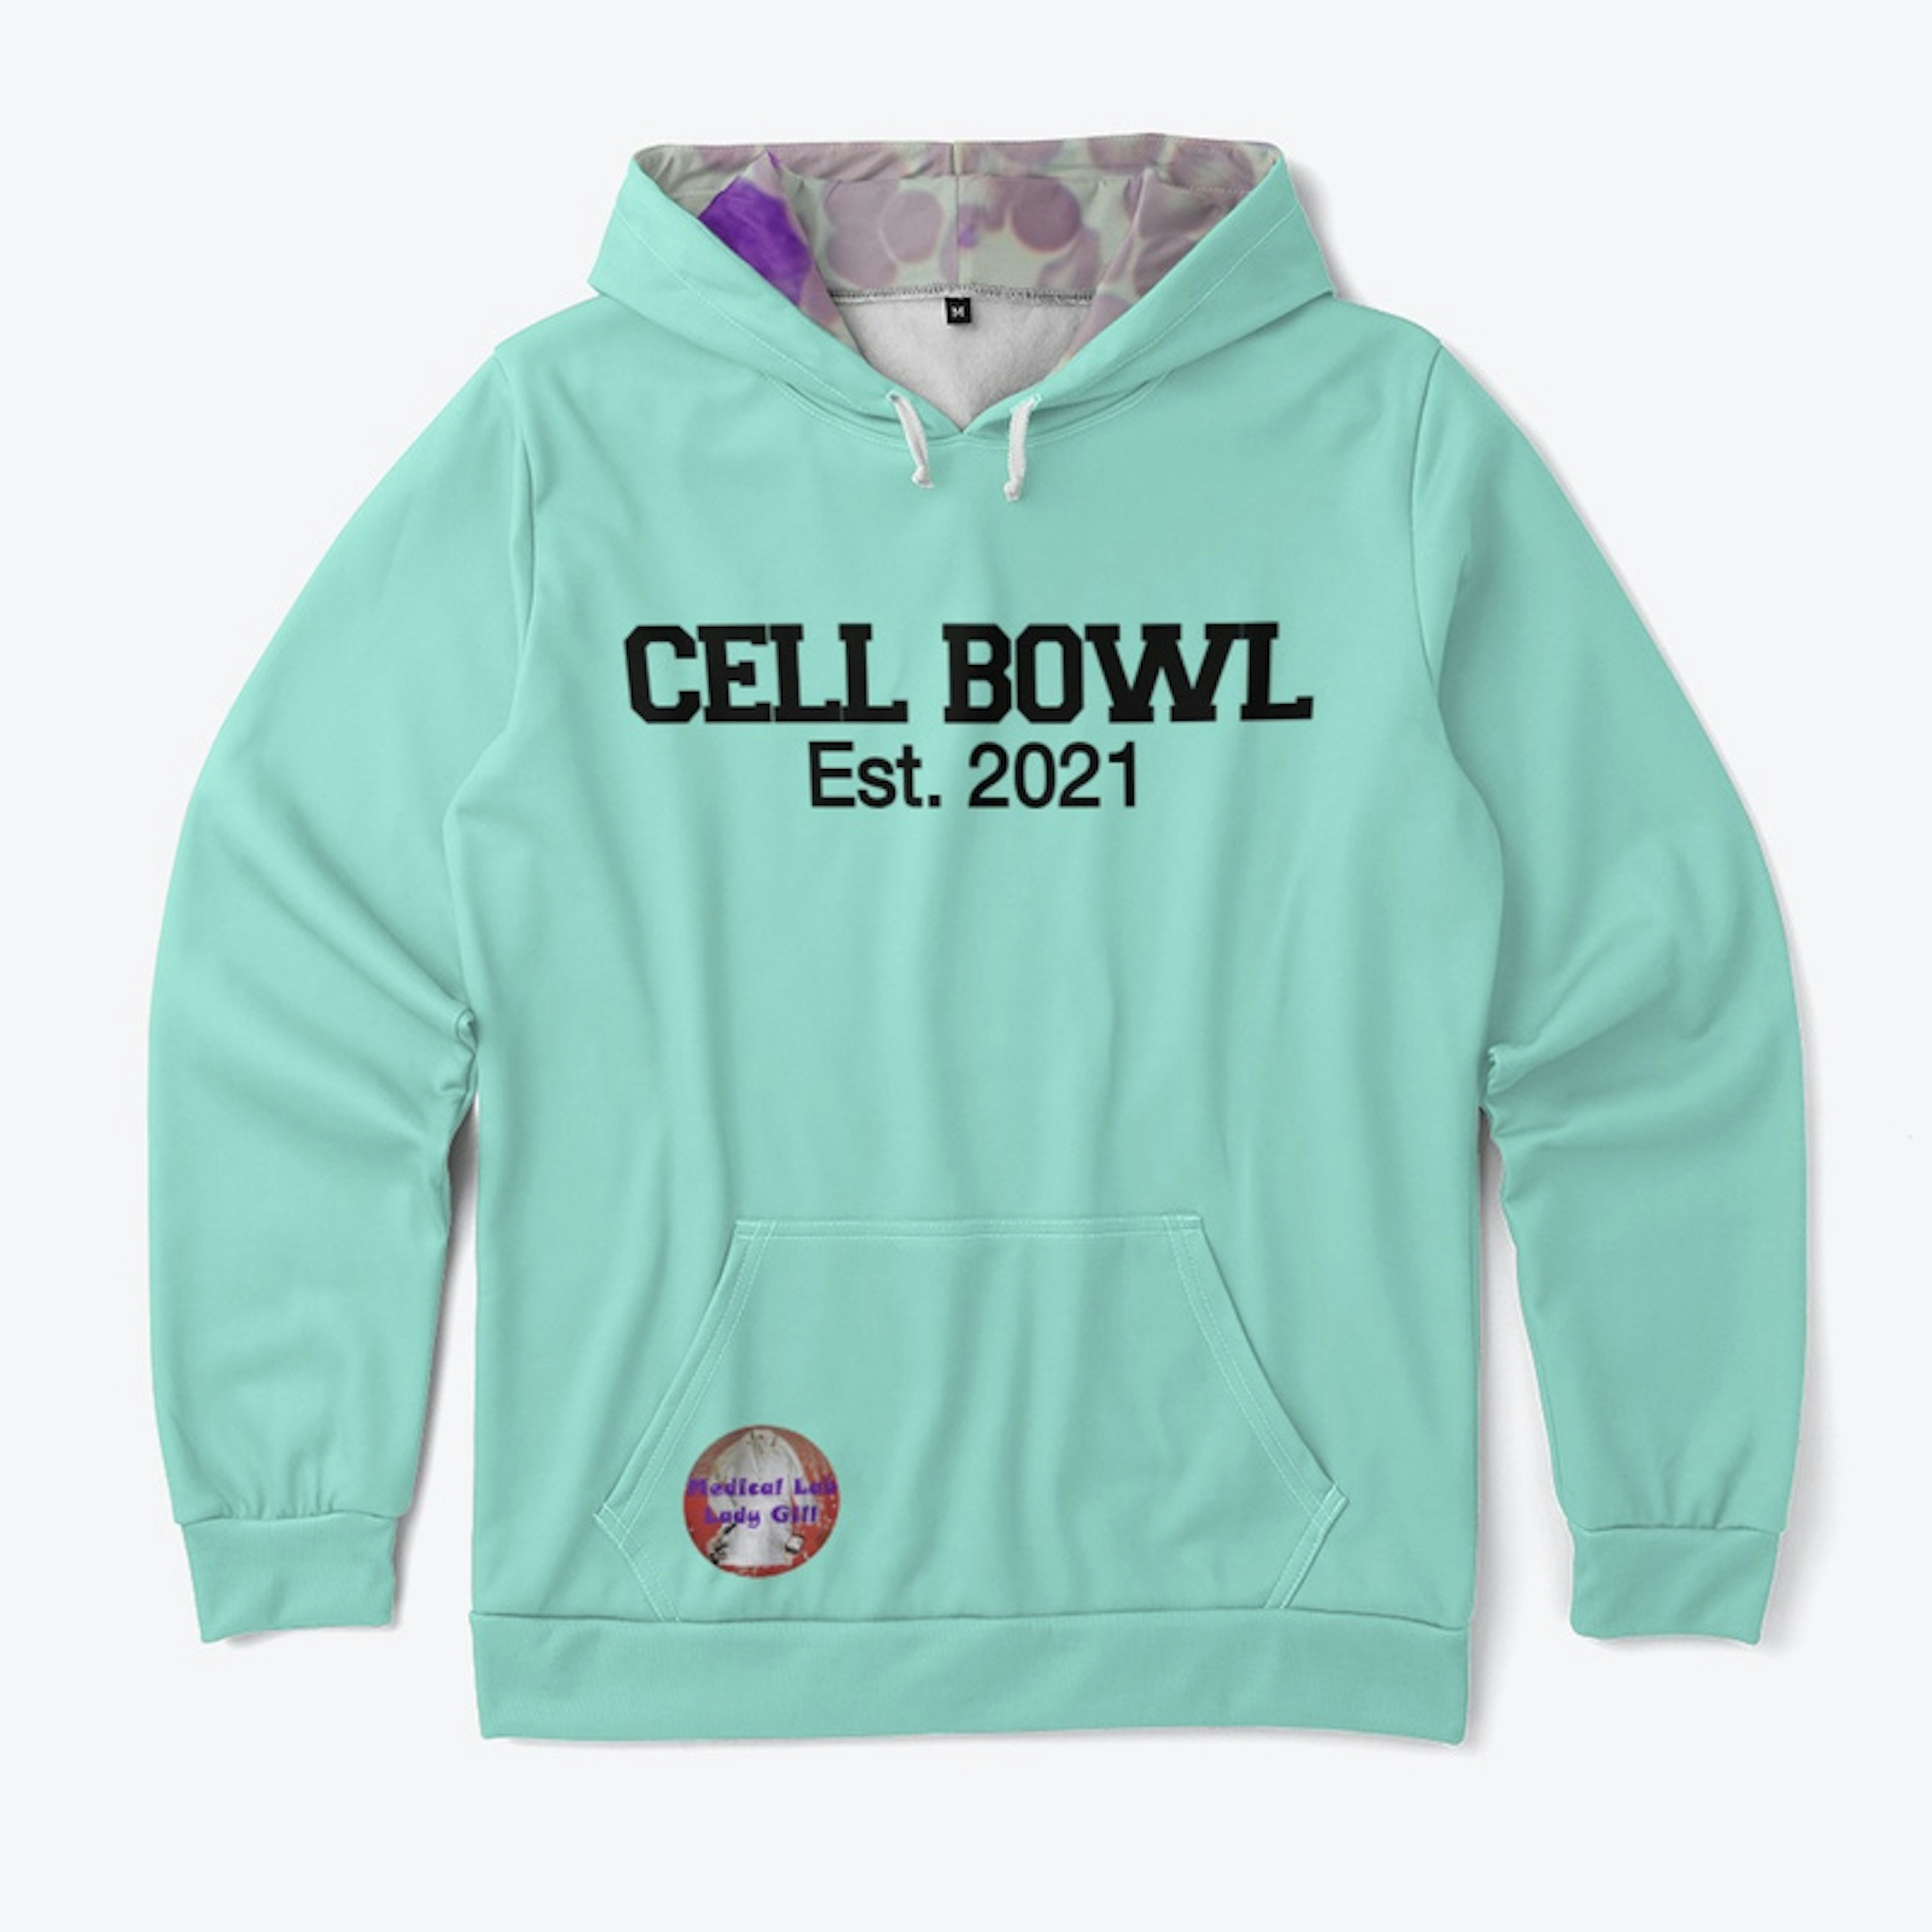 Cell Bowl Jersey 77